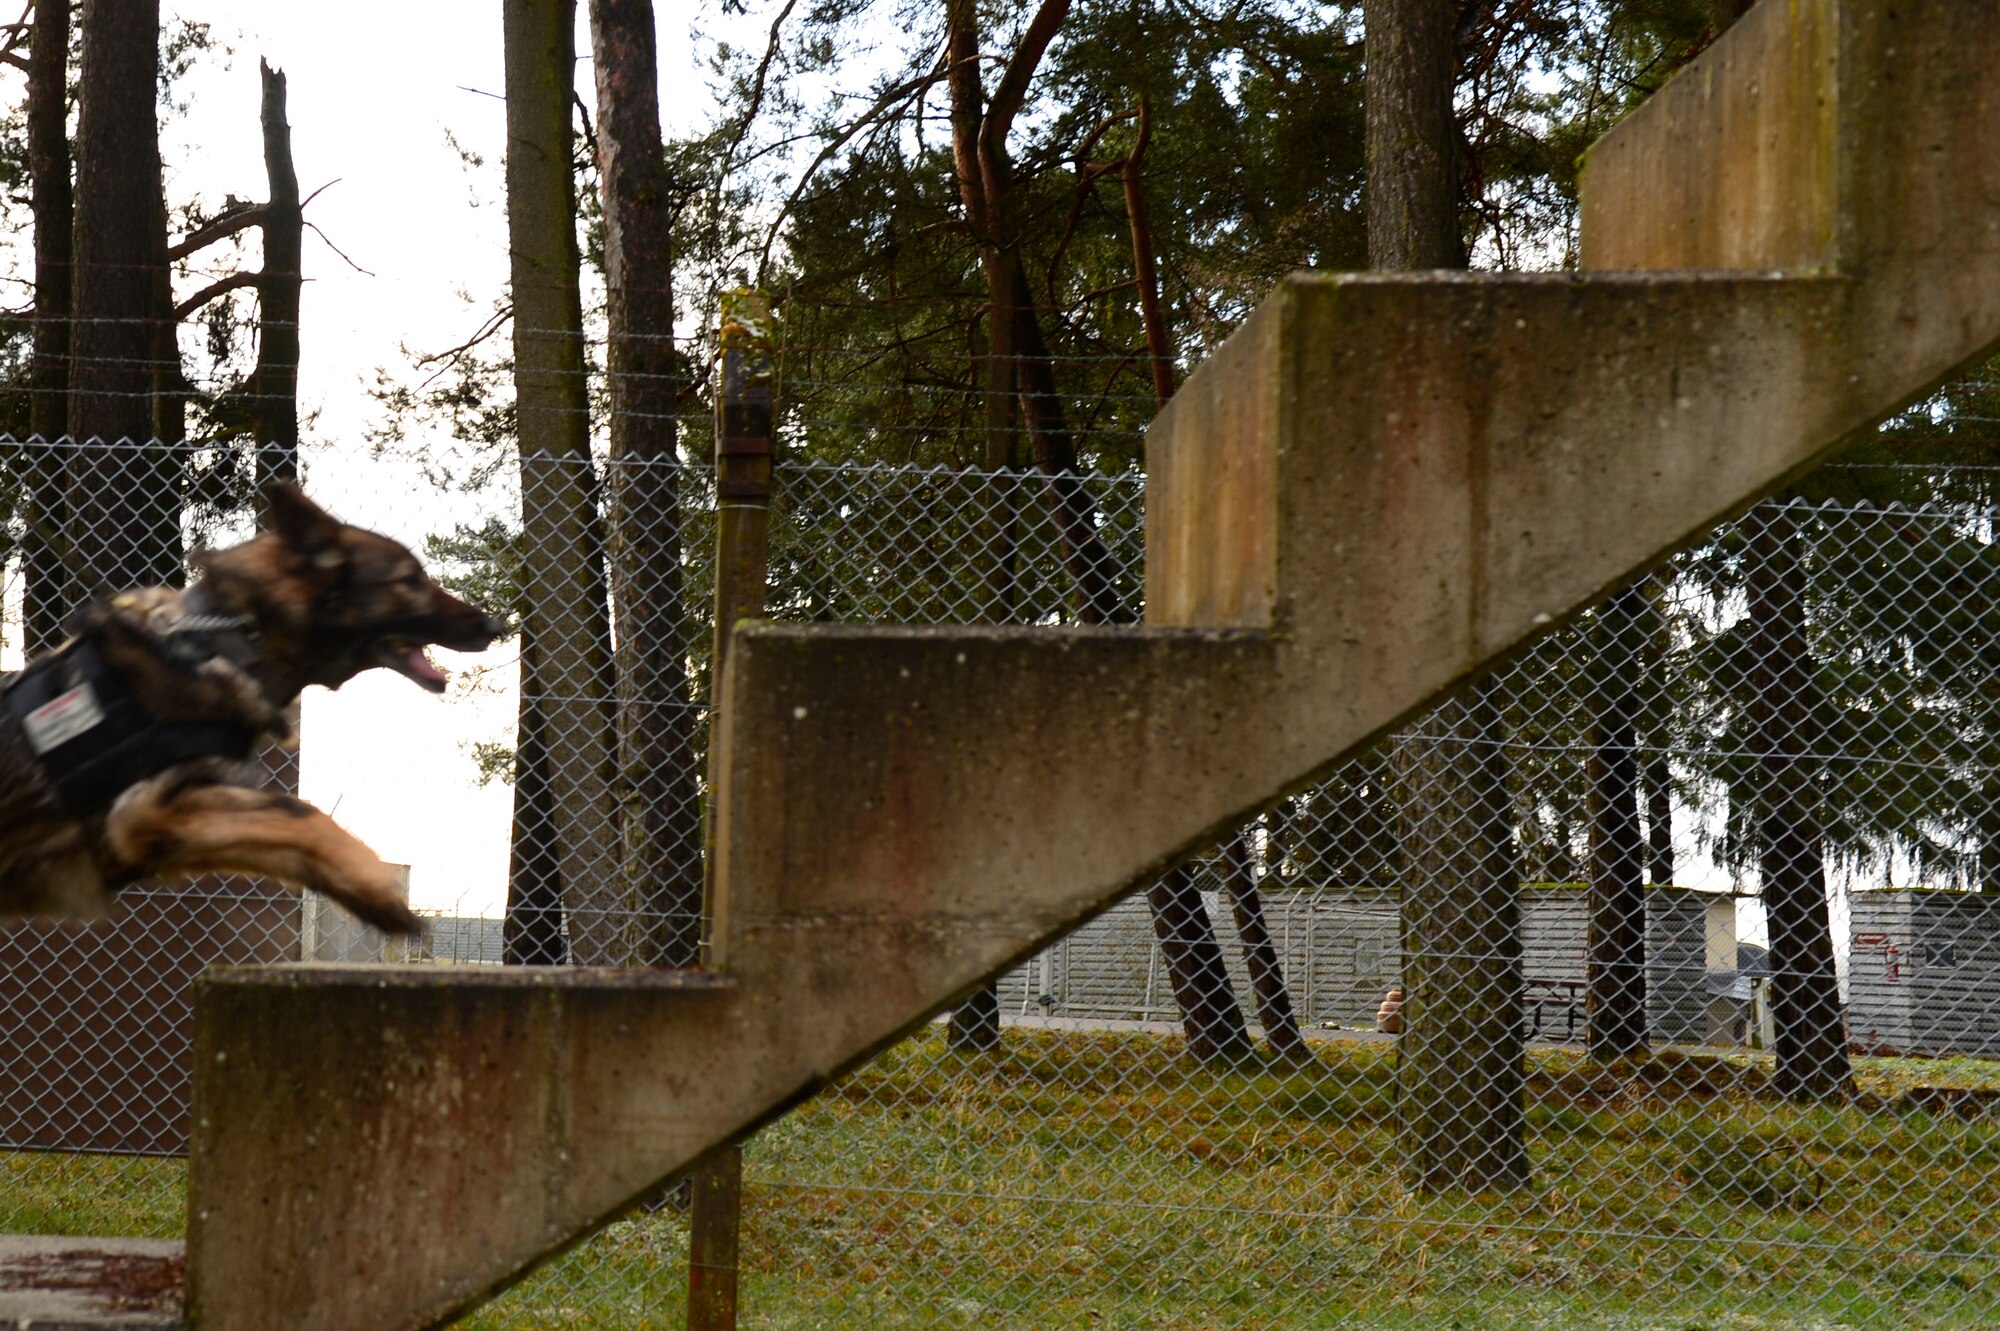 The obstacle course is one of many challenges that are used to display what the MWD is capable of when trained properly.